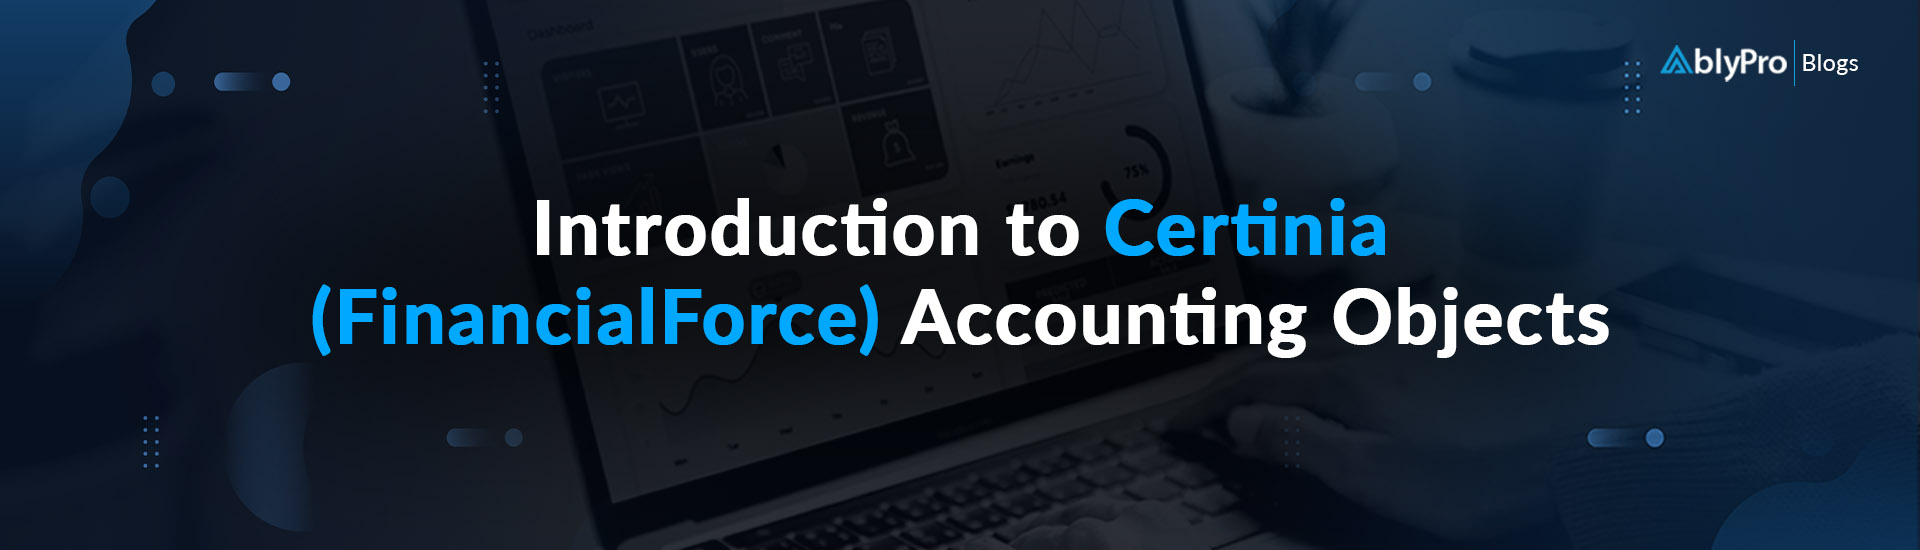 Certinia (FinancialForce) Accounting Objects